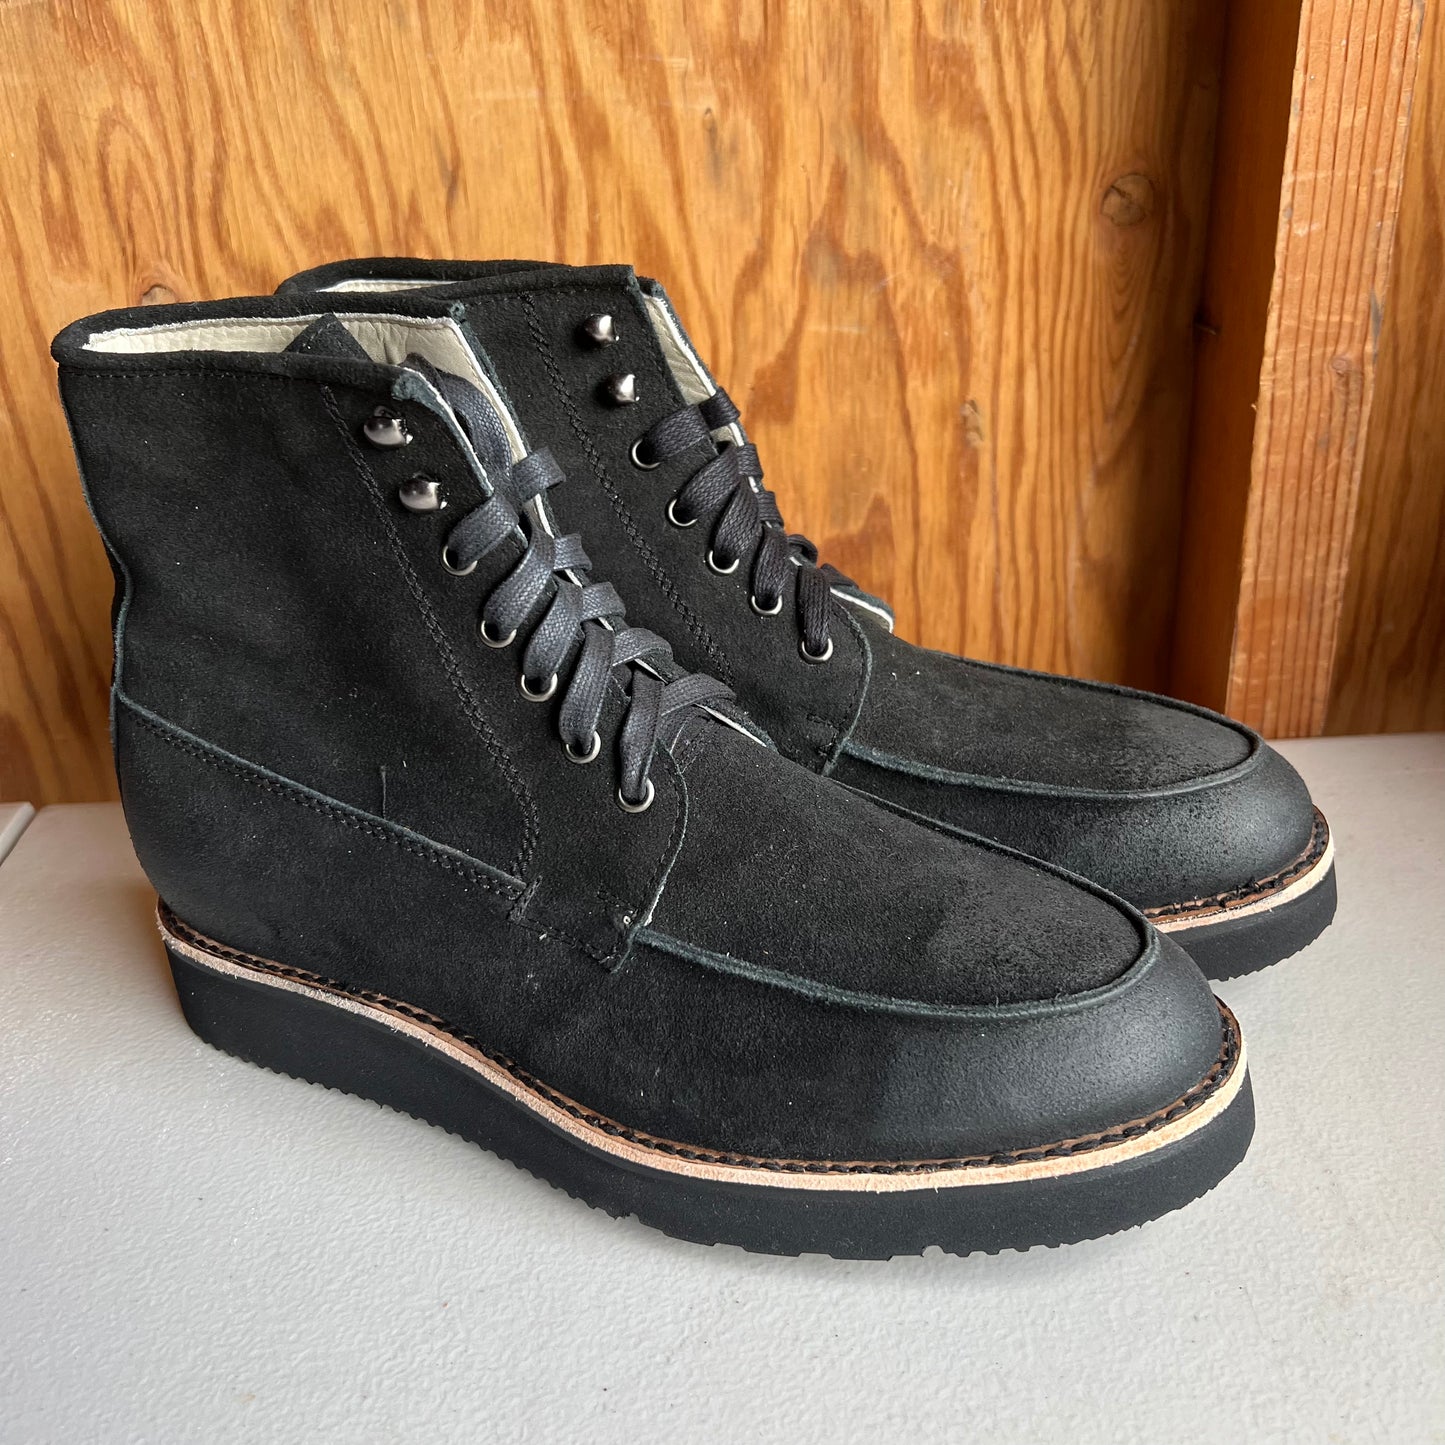 Nomad - Waxed Midnight Suede Size 9.5